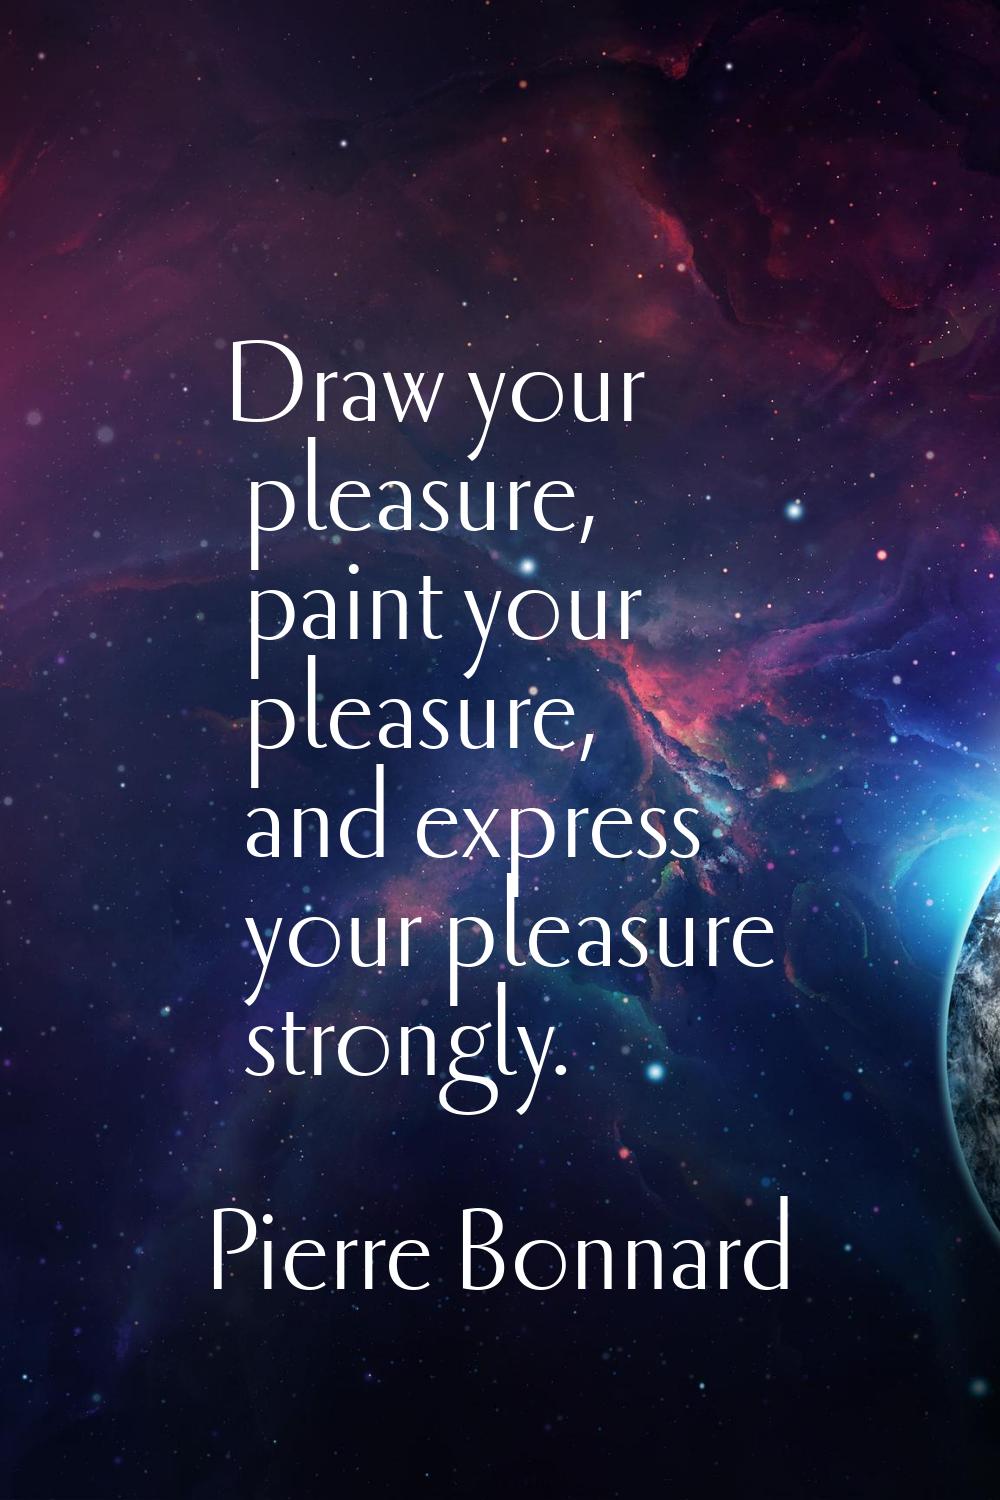 Draw your pleasure, paint your pleasure, and express your pleasure strongly.